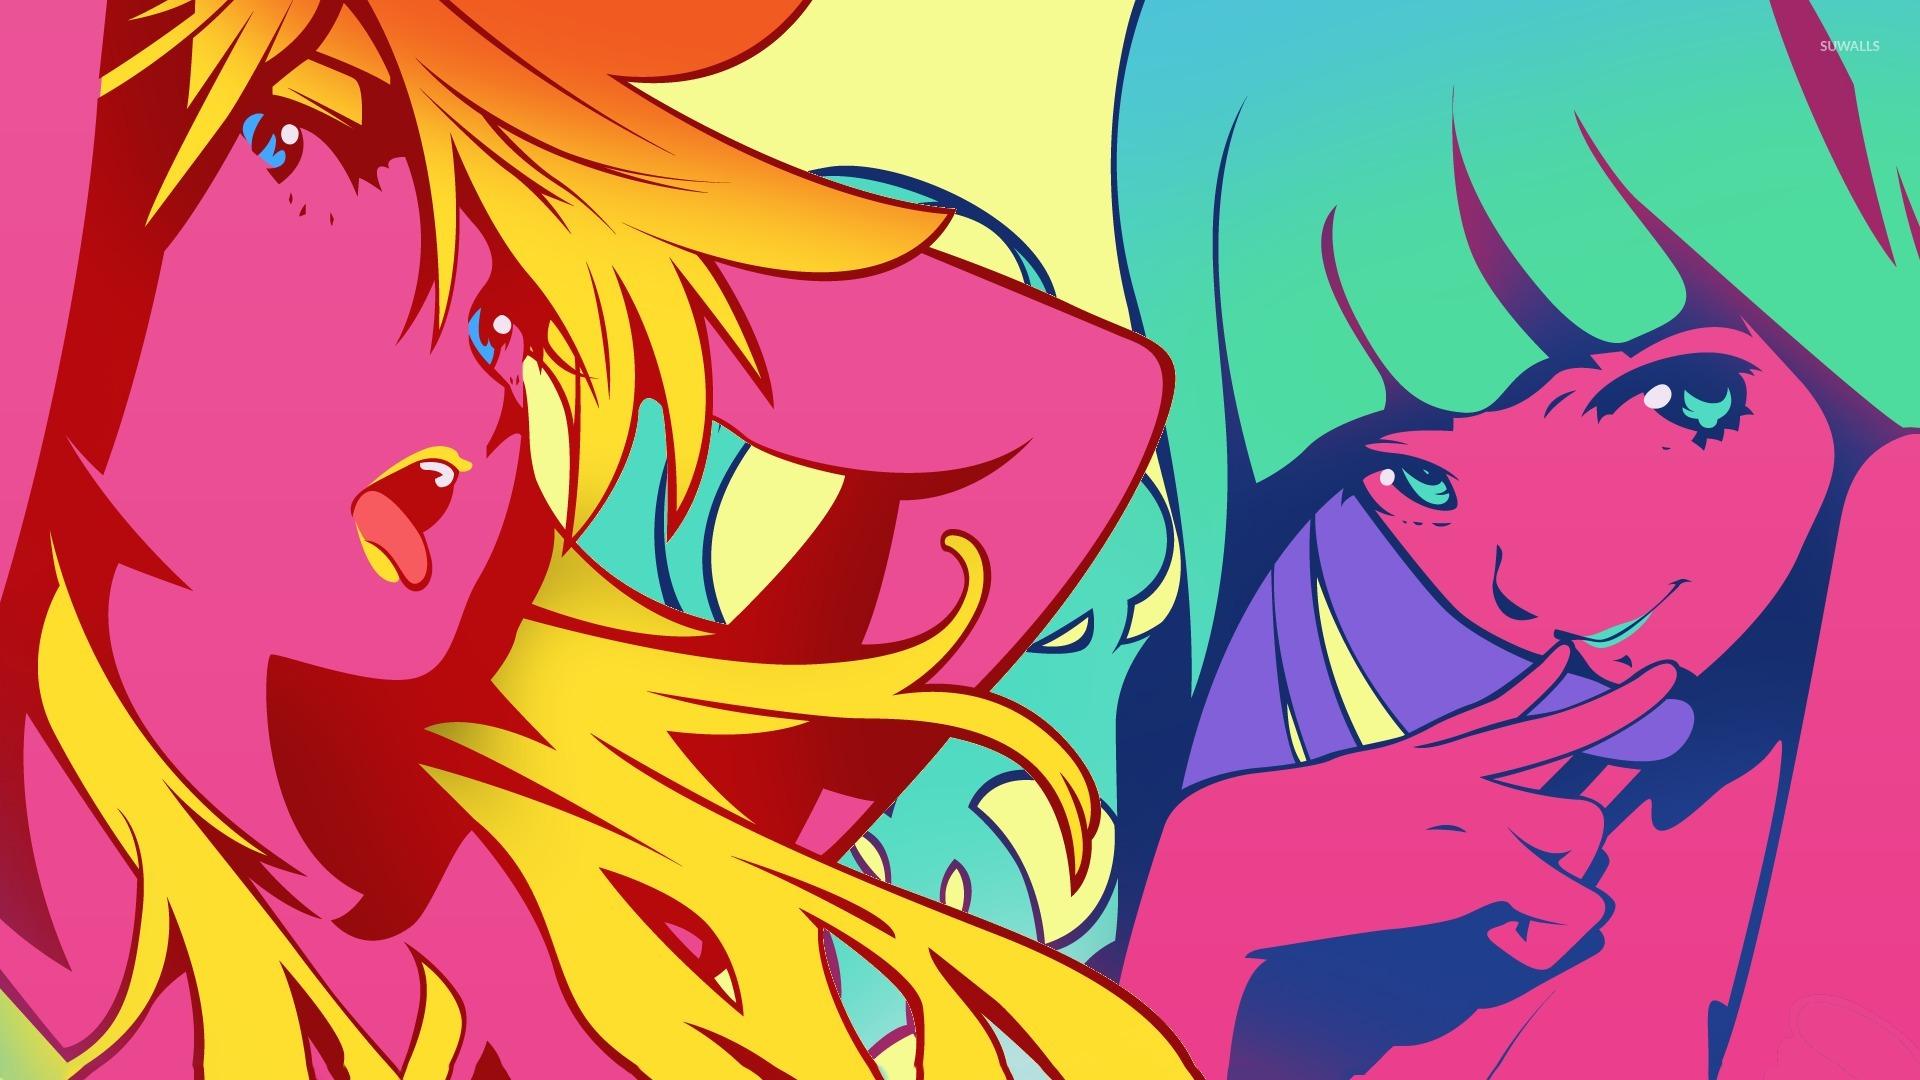 Panty and Stocking in Panty & Stocking with Garterbelt